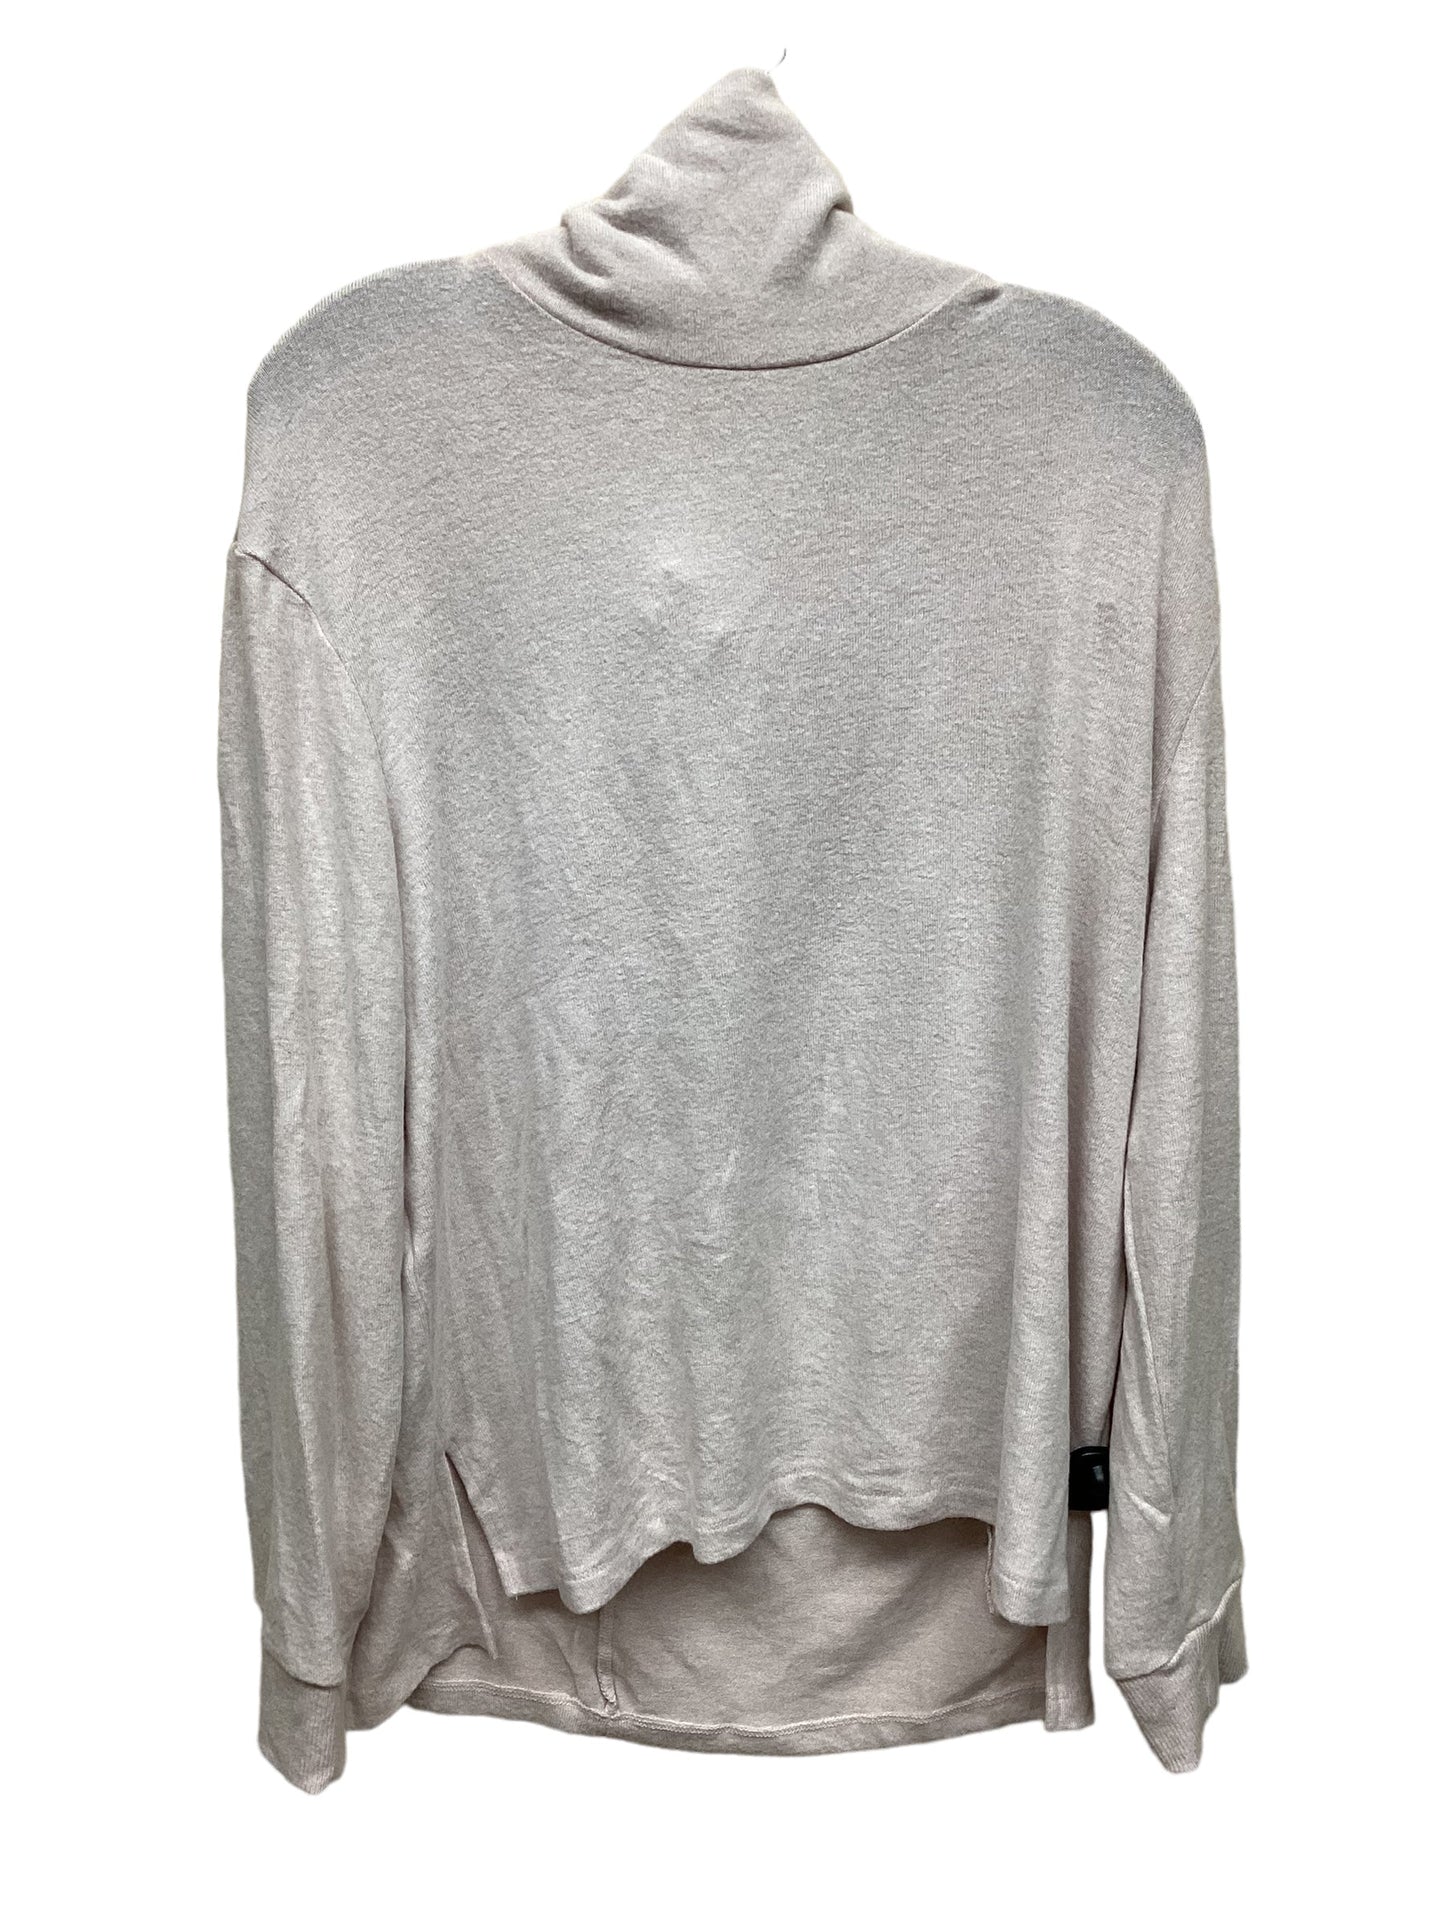 Top Long Sleeve By Stars Above  Size: L